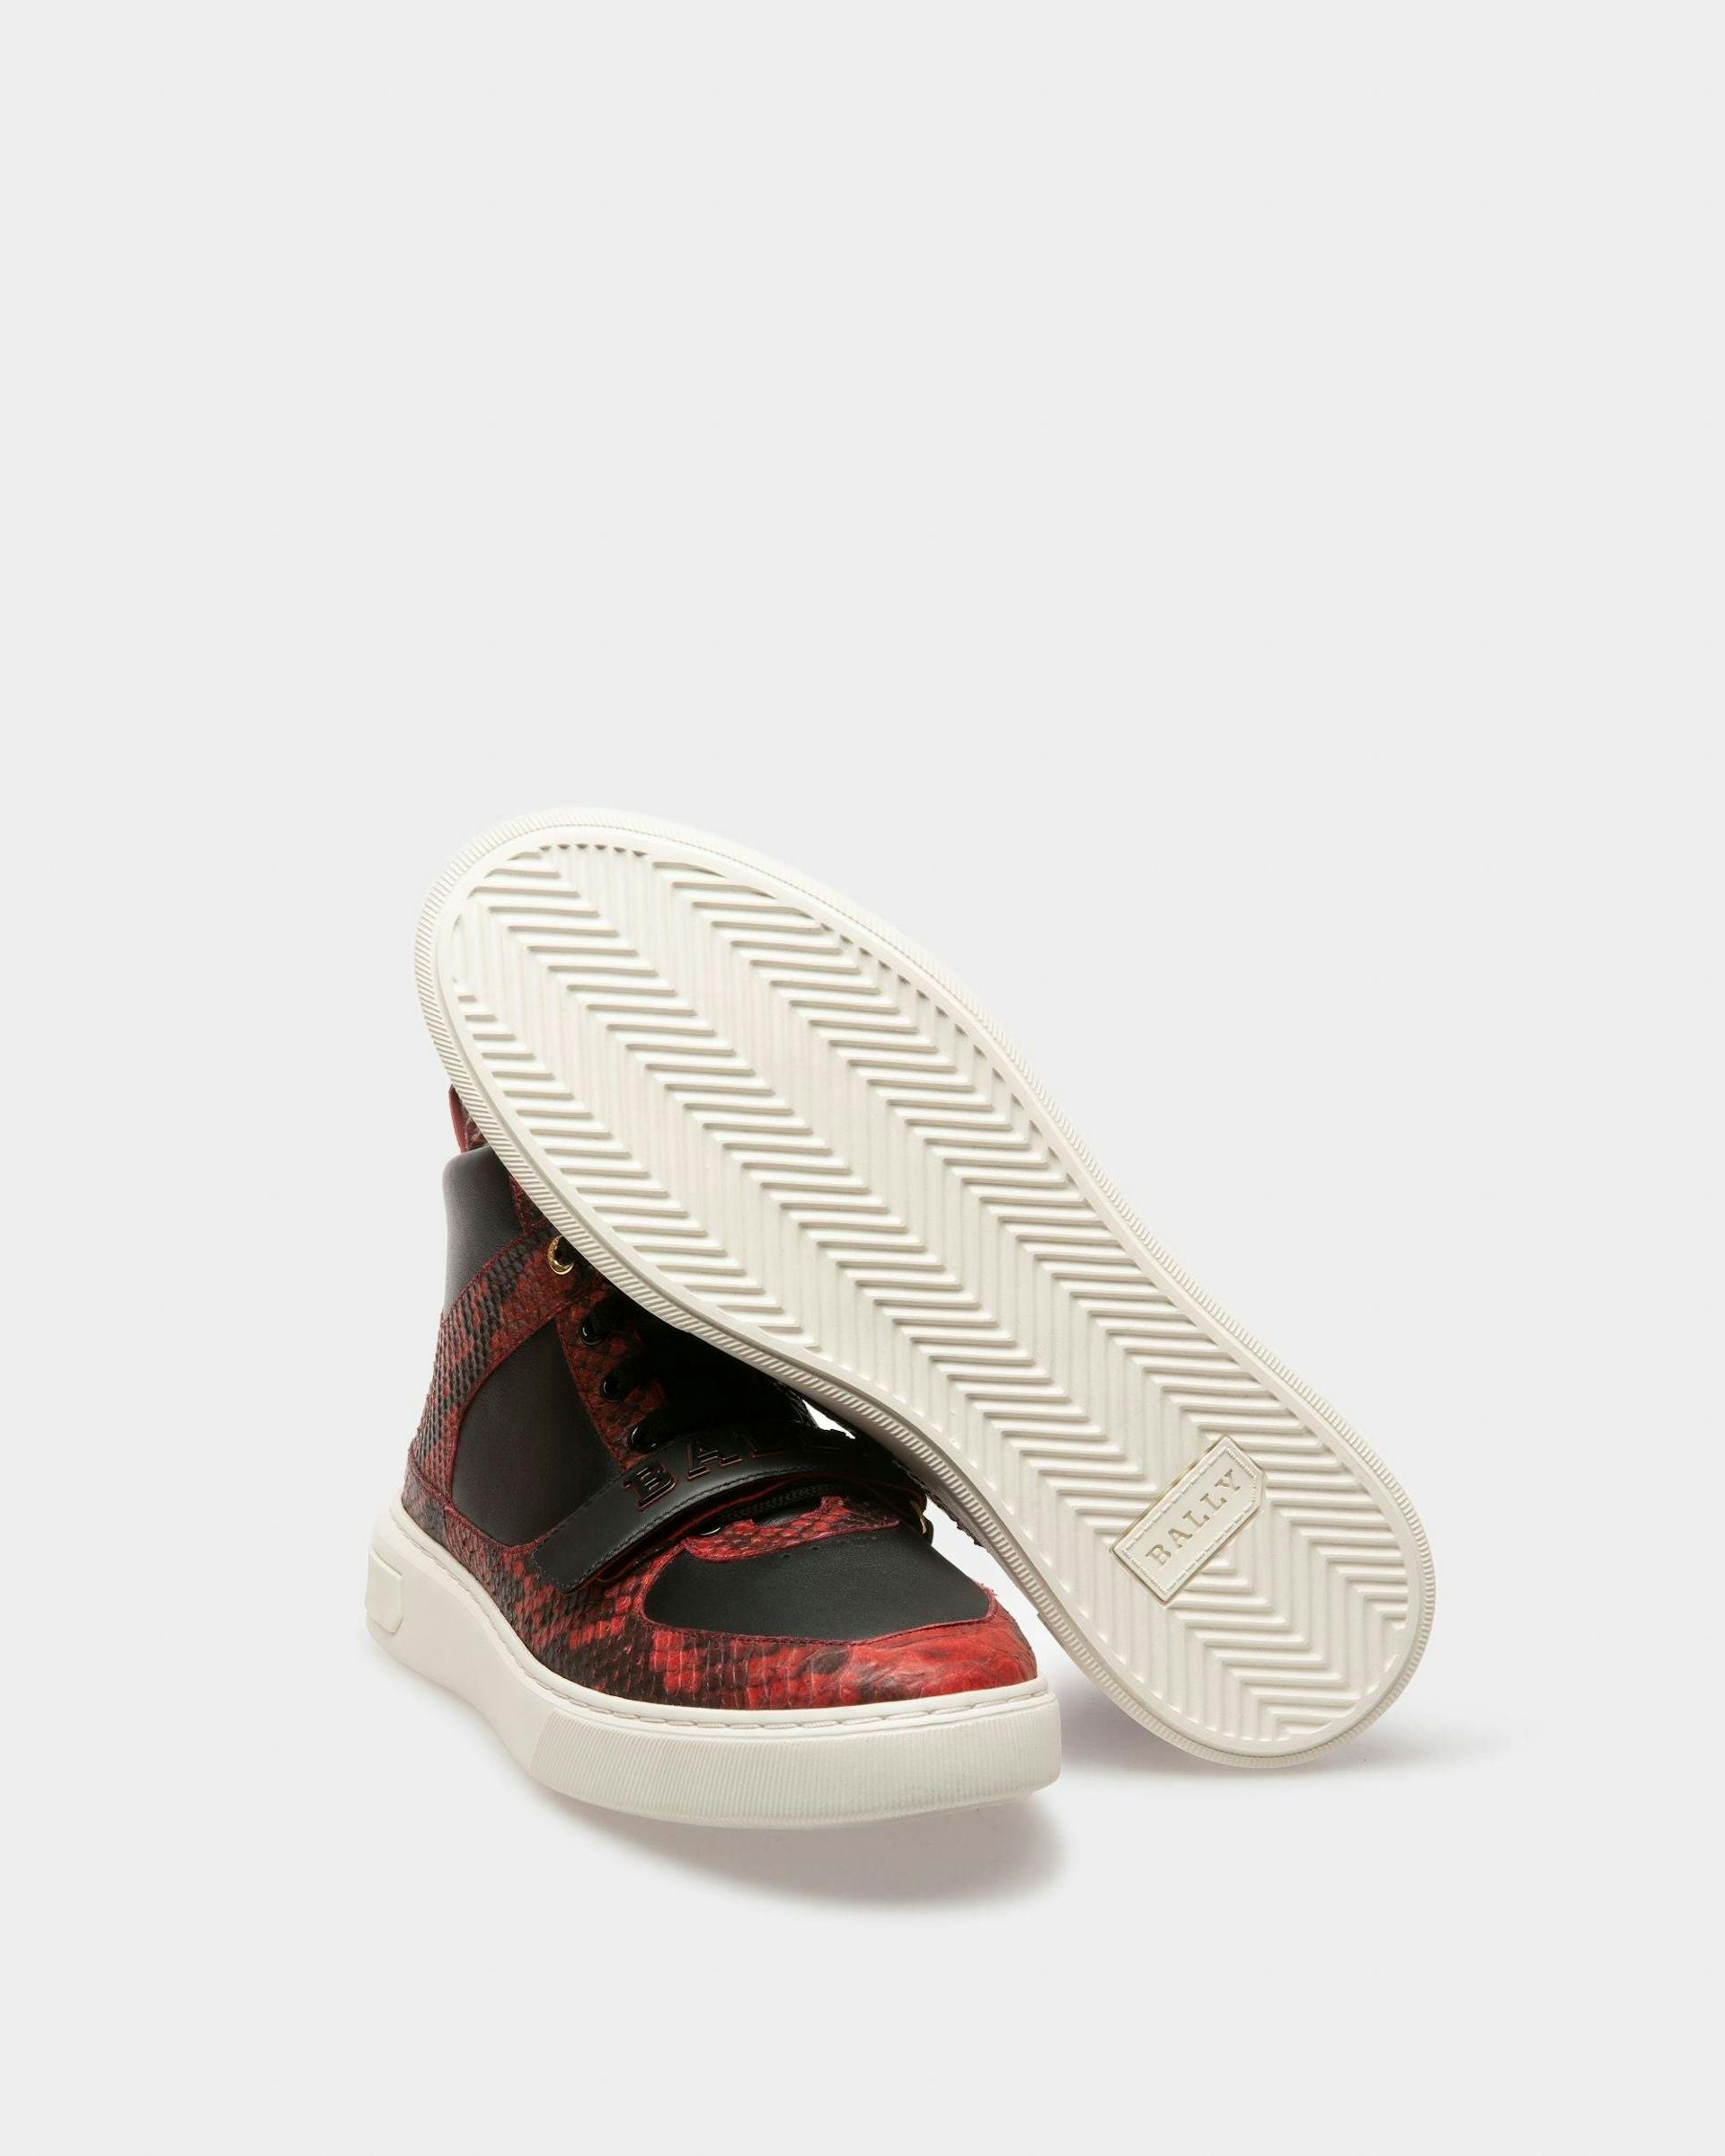 Merryk Leather Sneakers In Bally Red & Black - Men's - Bally - 05